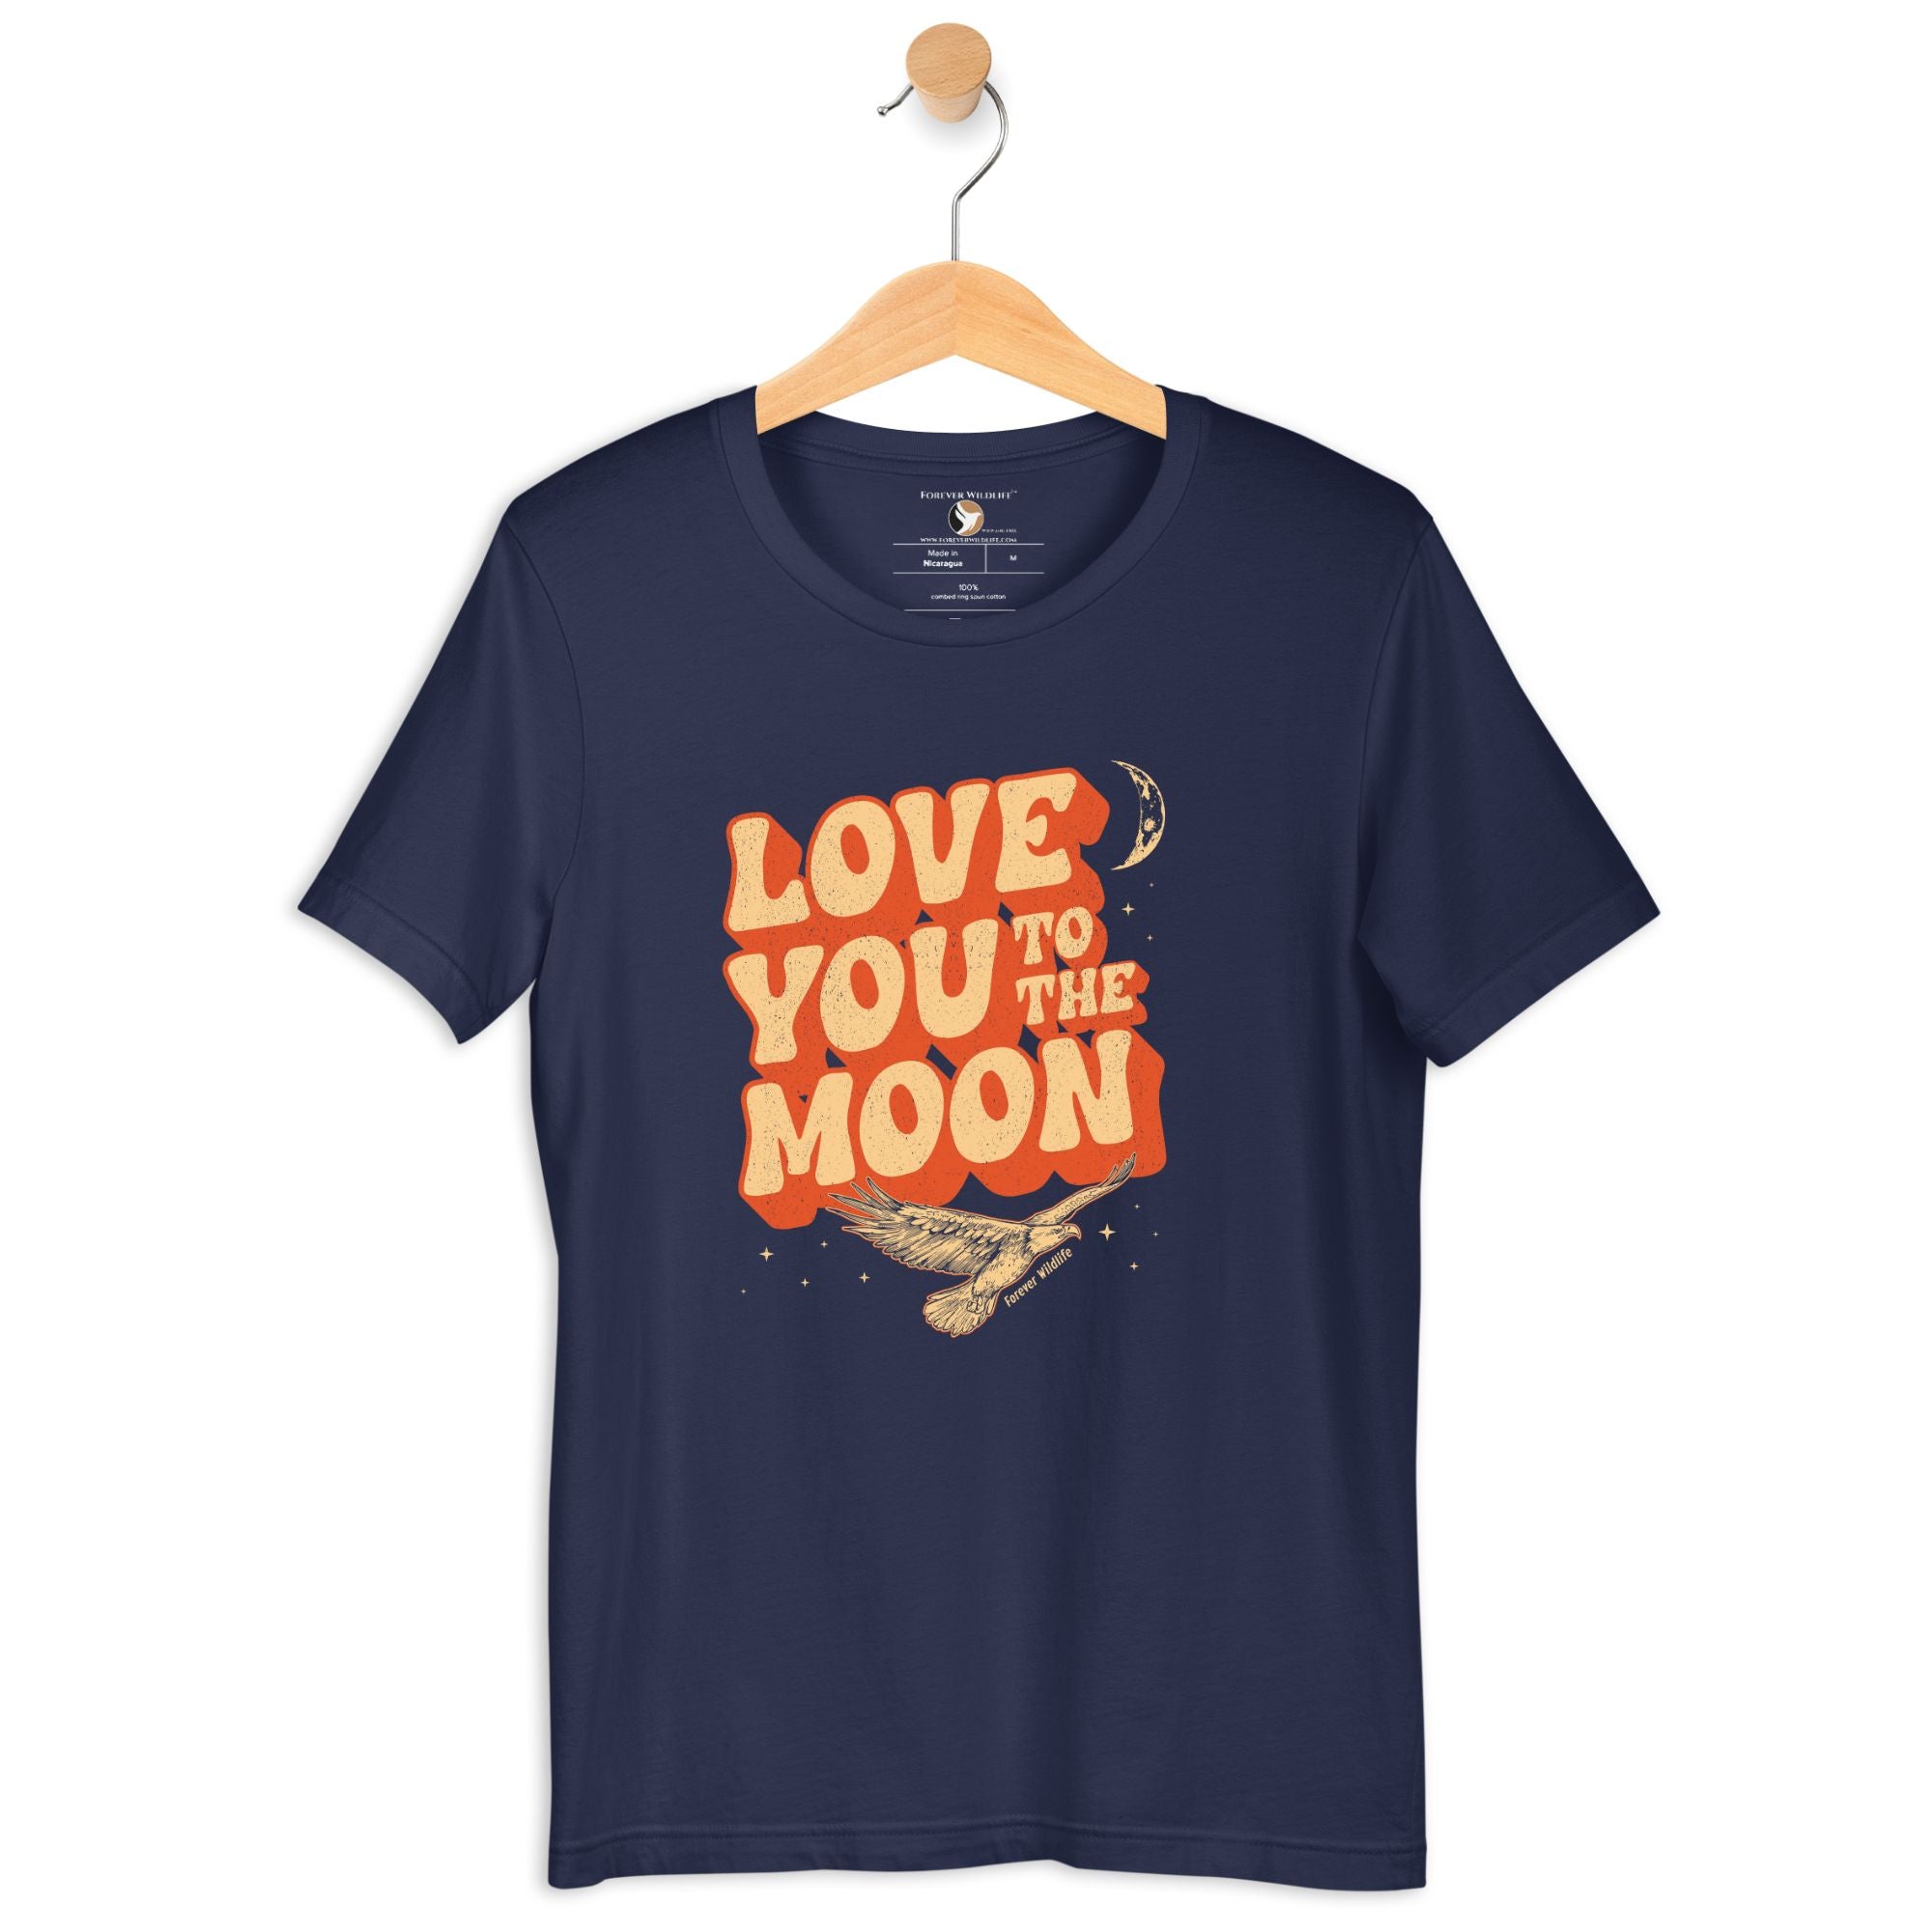 Eagle T-Shirt in Navy – Premium Wildlife T-Shirt Design with Love You To The Moon Text, Eagle Shirts and Wildlife Clothing